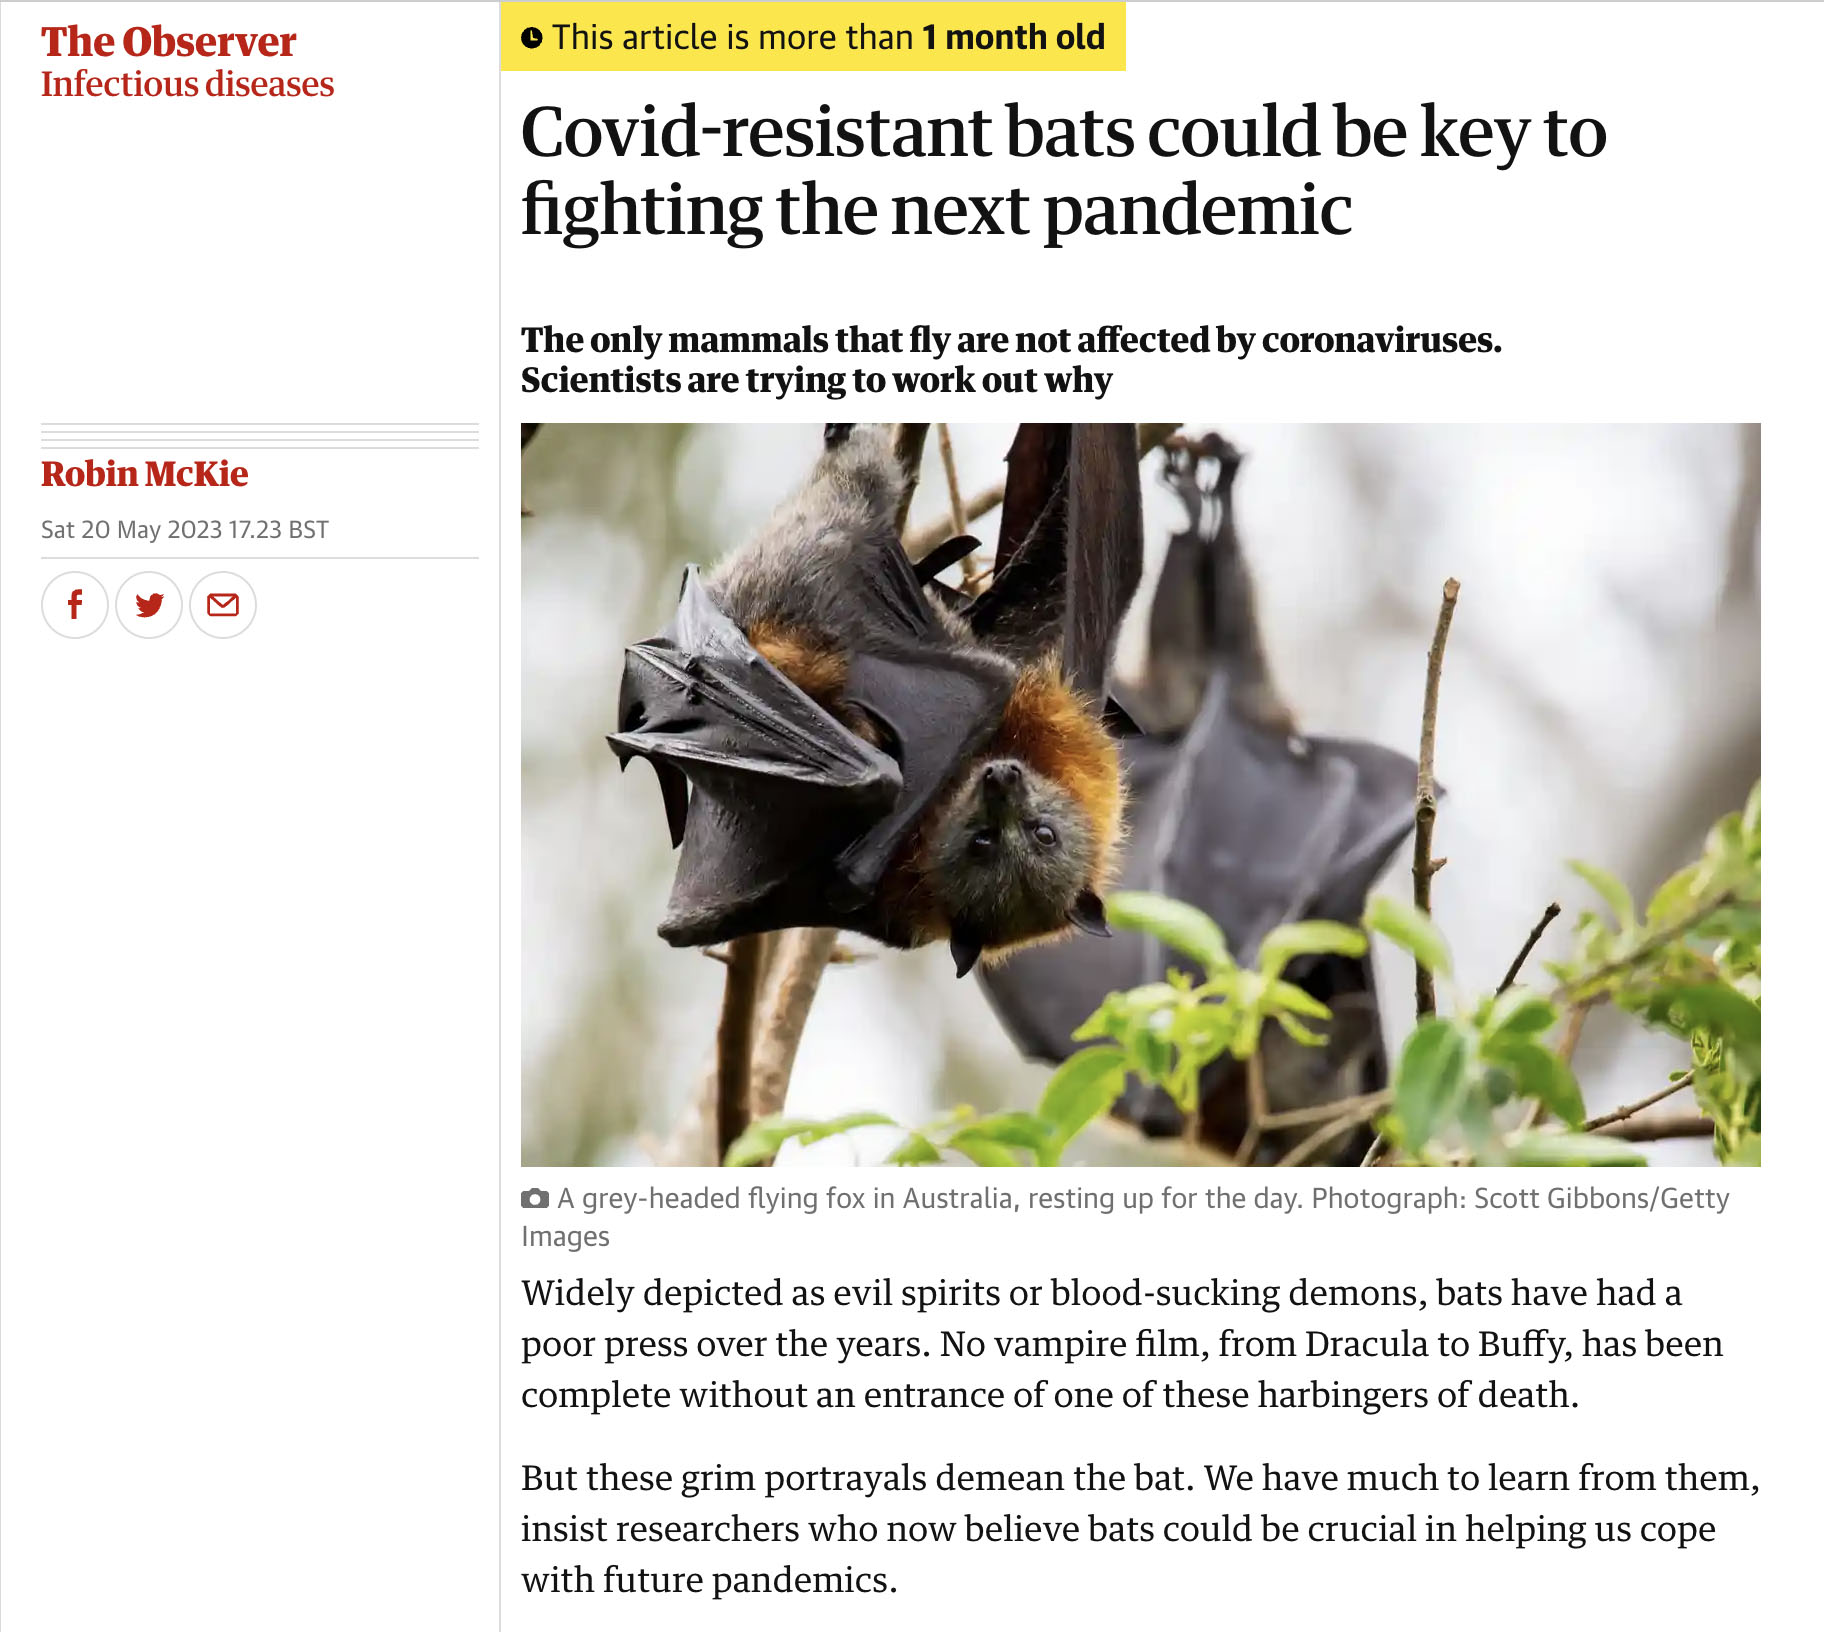 Screenshot from an online article from the Guardian. Headline reading: “Covid-resistant bats could be key to fighting the next pandemic”